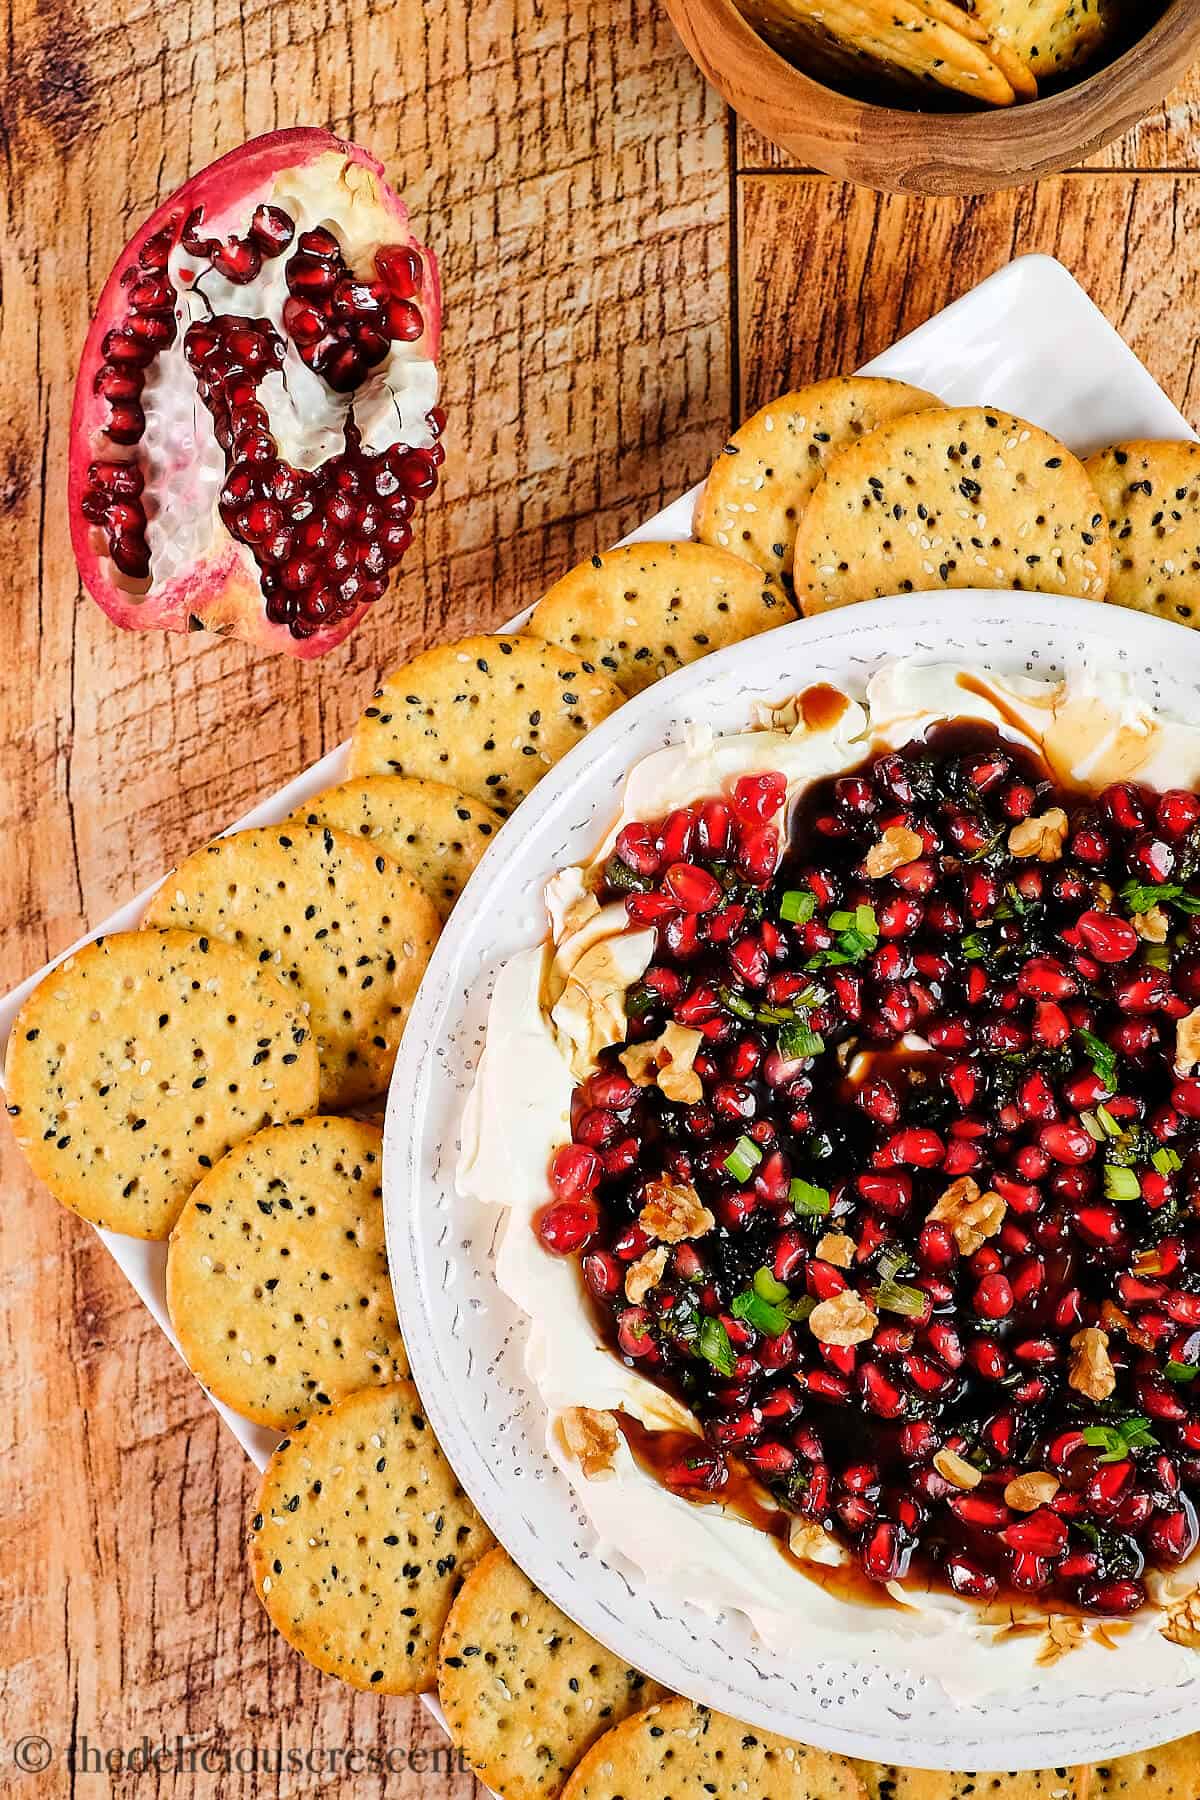 Dip topped with arils, walnuts and served with crackers.